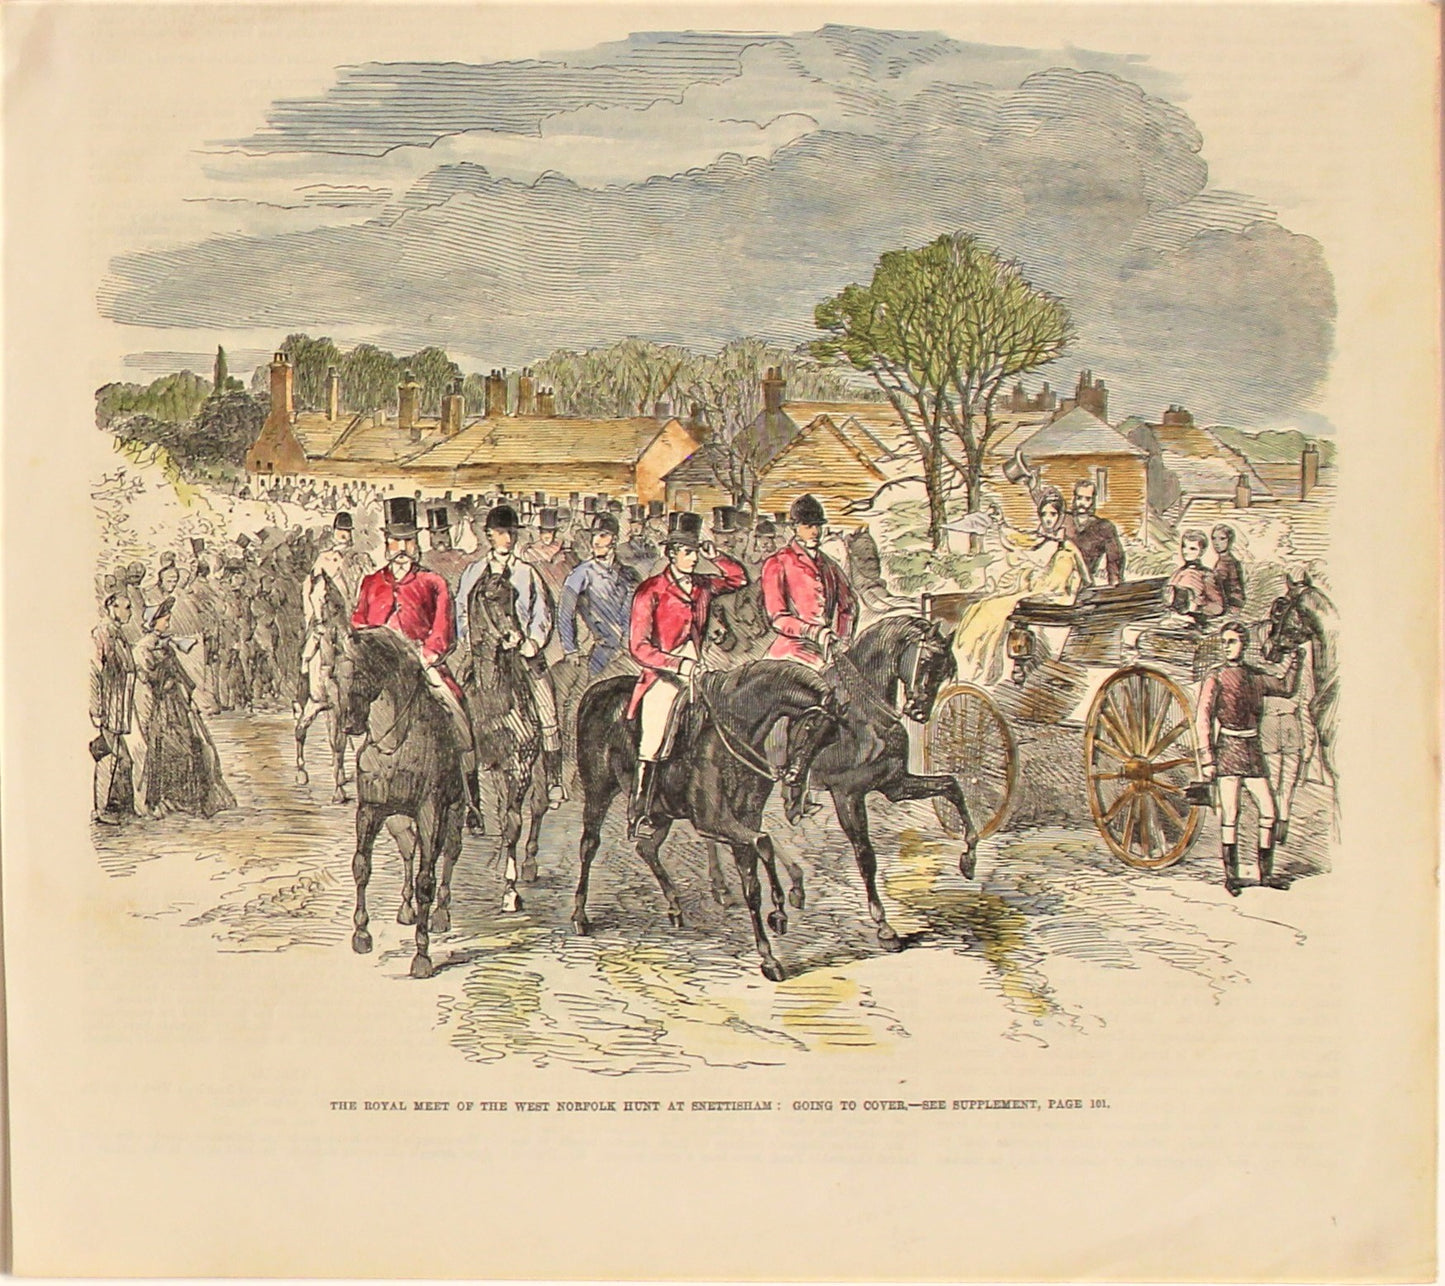 Sporting, Equestrian, The Royal Meet, The West Norfolk Hunt at Snettisham, 1863